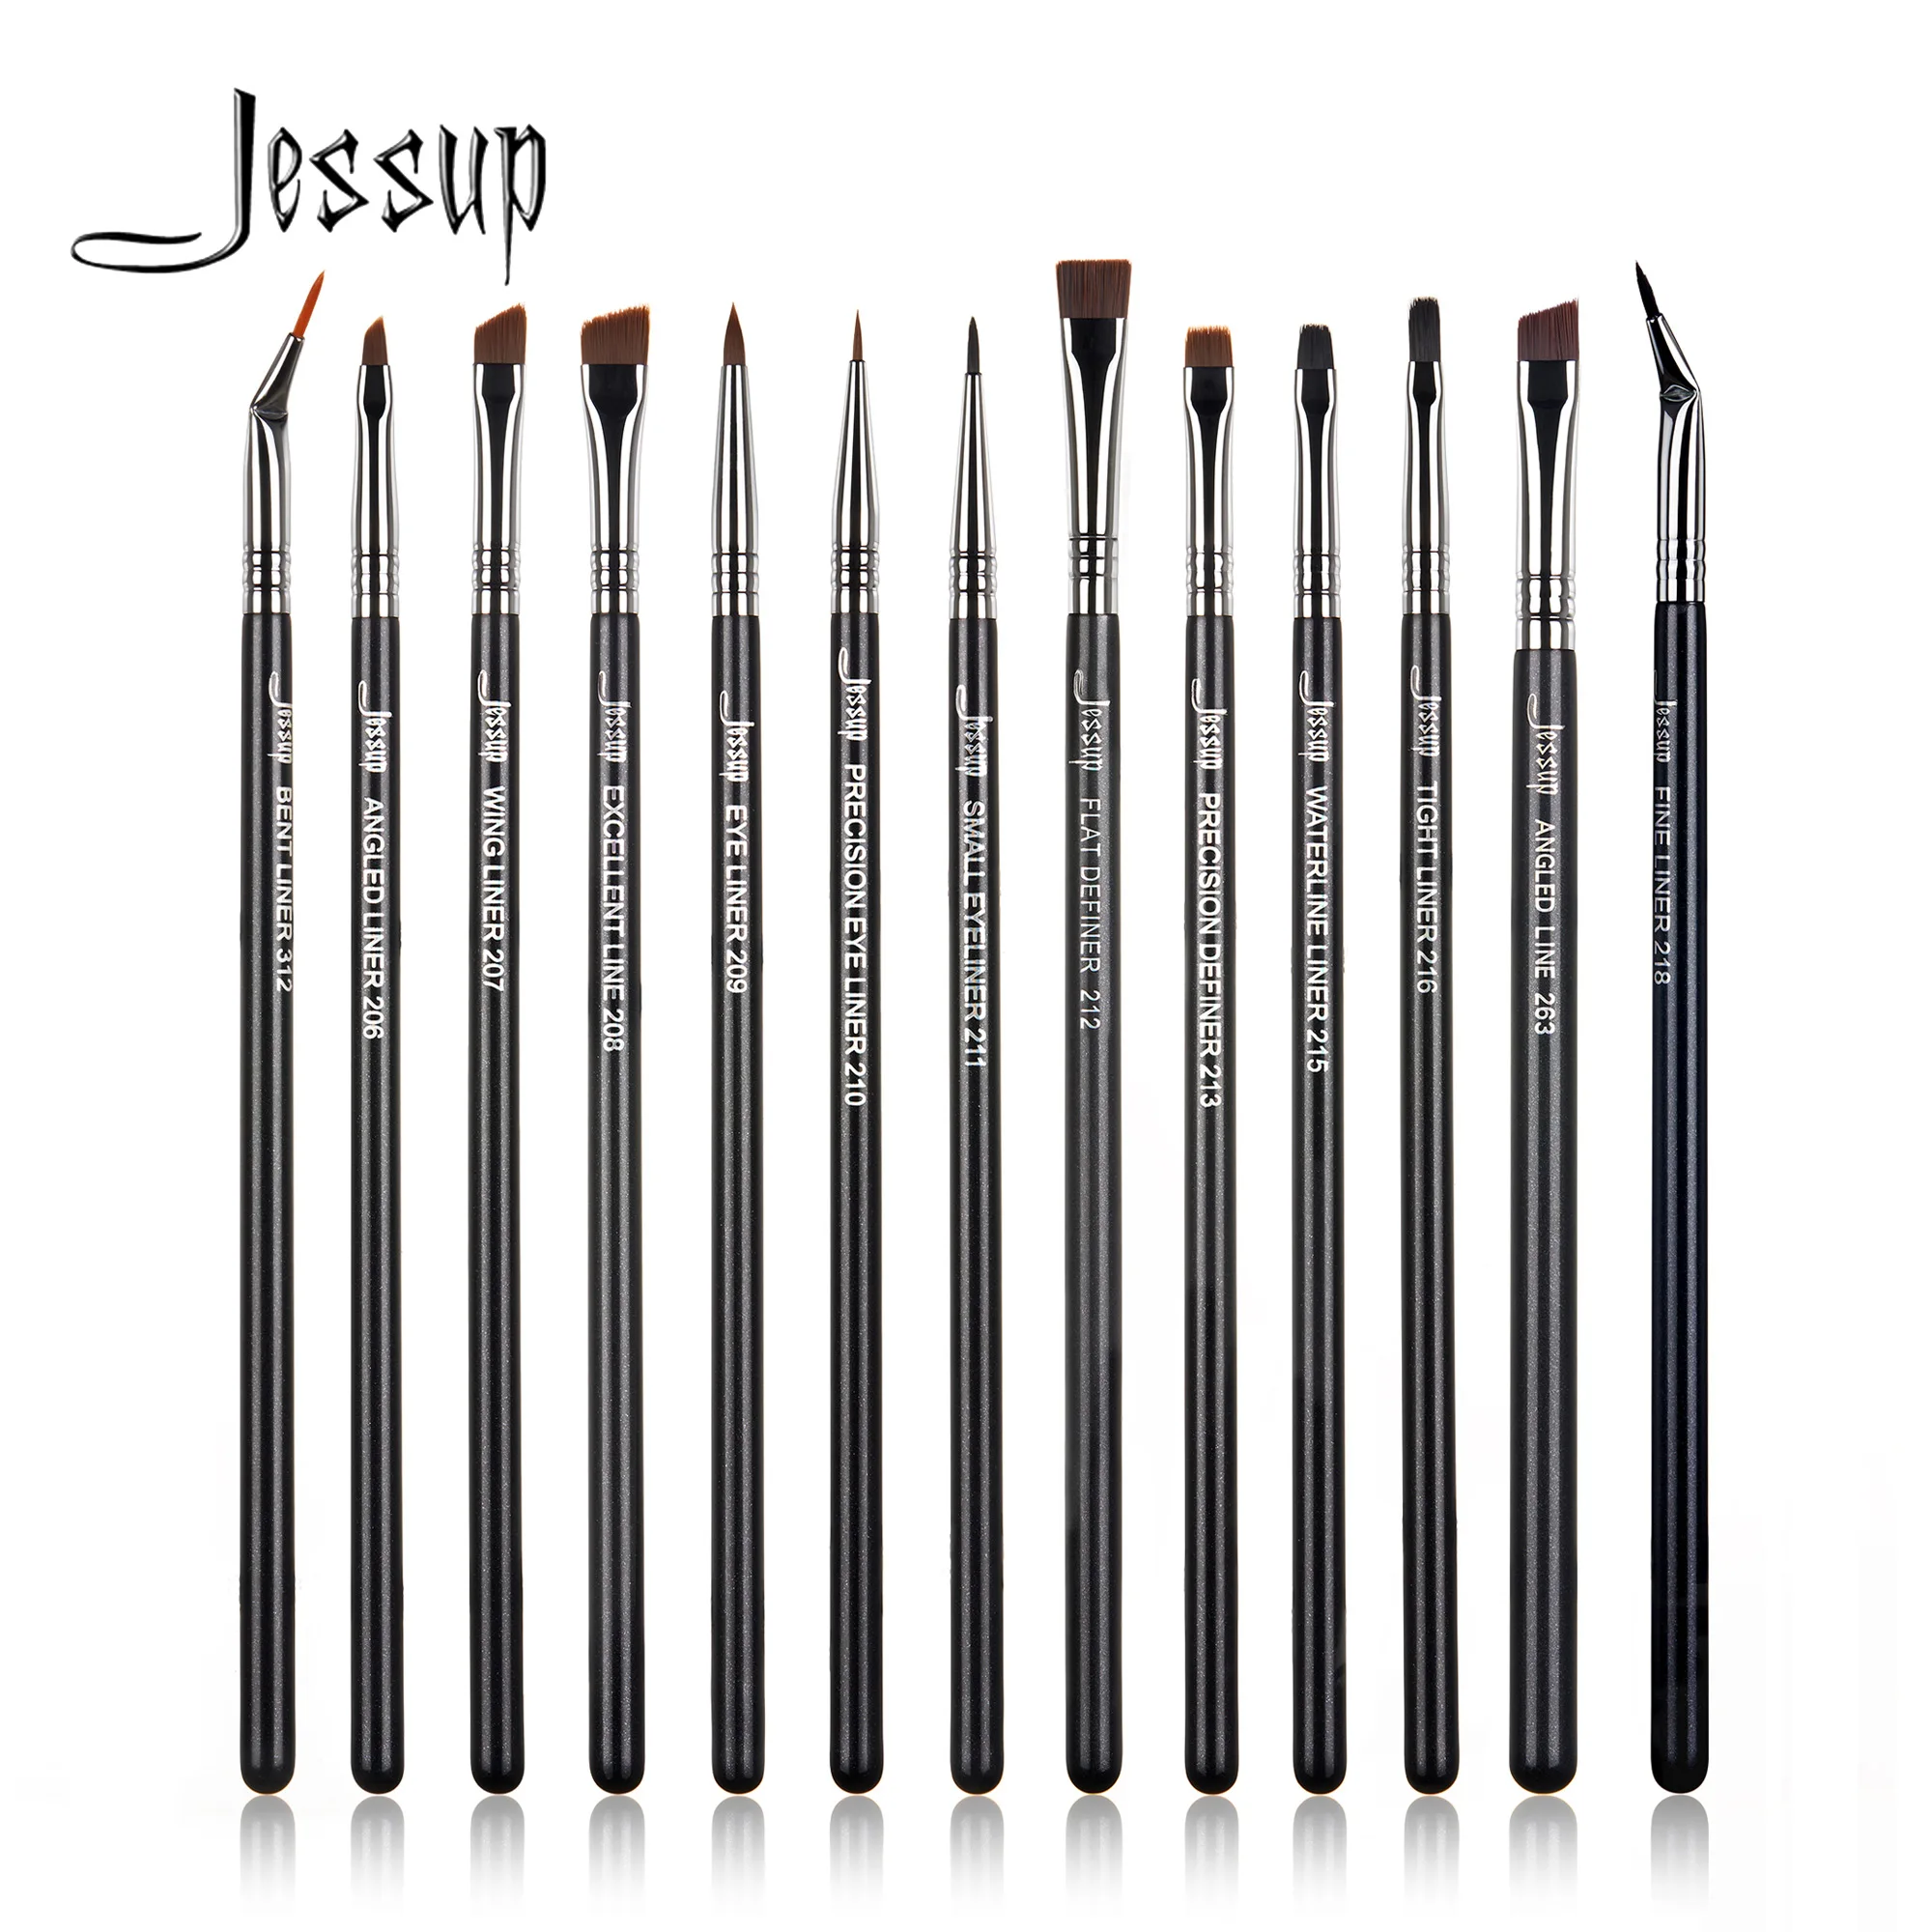 

Jessup Eyeliner Brush Thin Bent Precision Angled Flat Definer Ultra Fine Pencil Precision Eye Liner Makeup Brush Synthetic S151